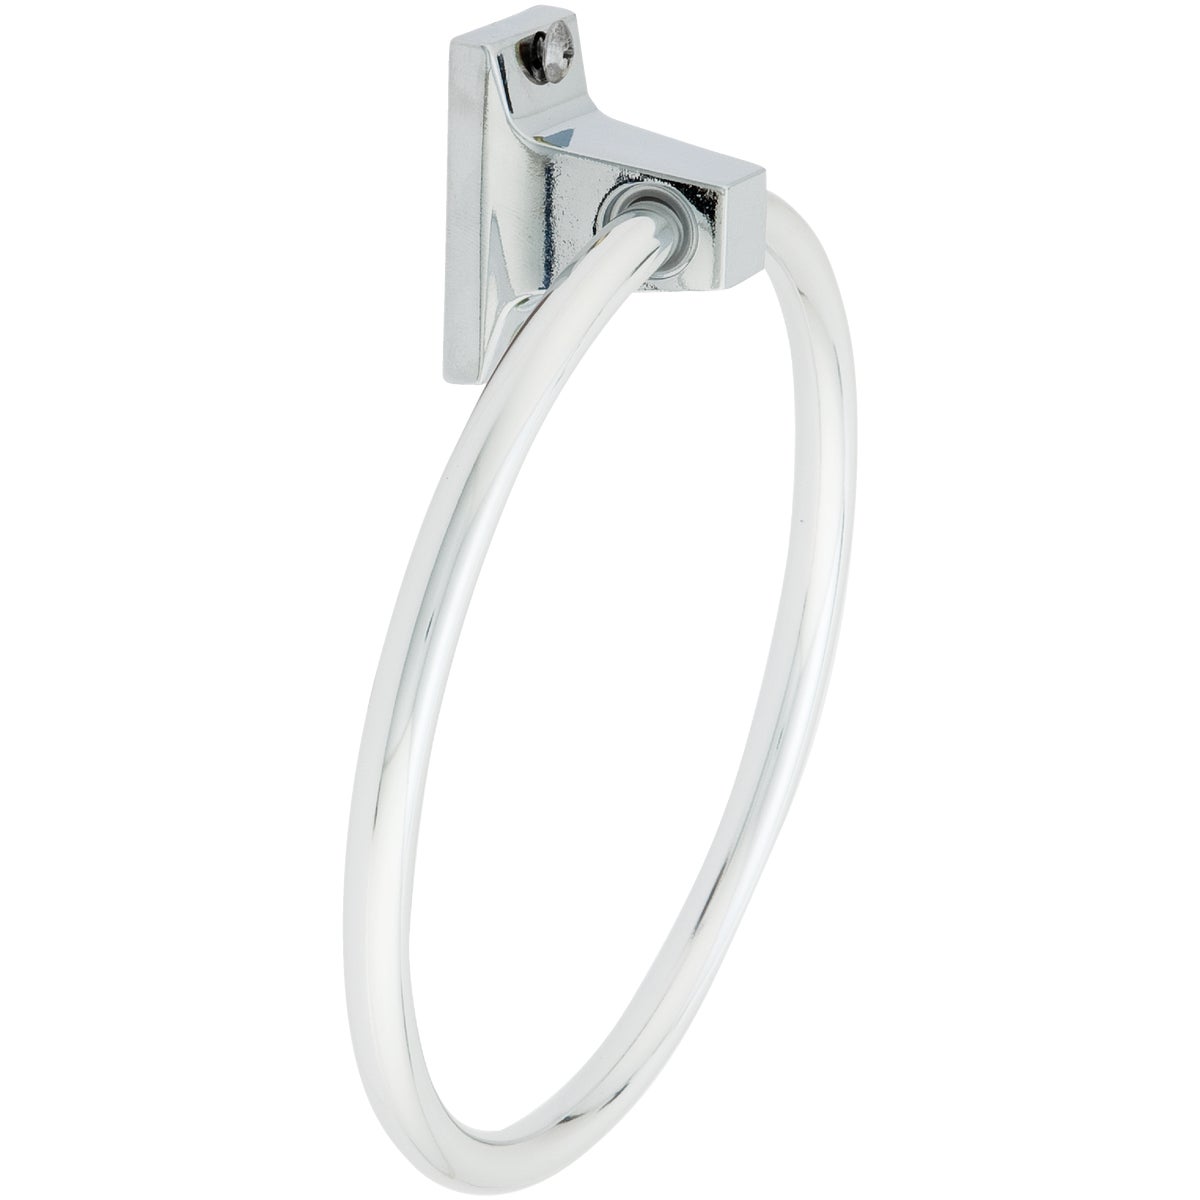 Item 408801, Alpha series zinc die-cast wall mount towel ring with exposed mounting 